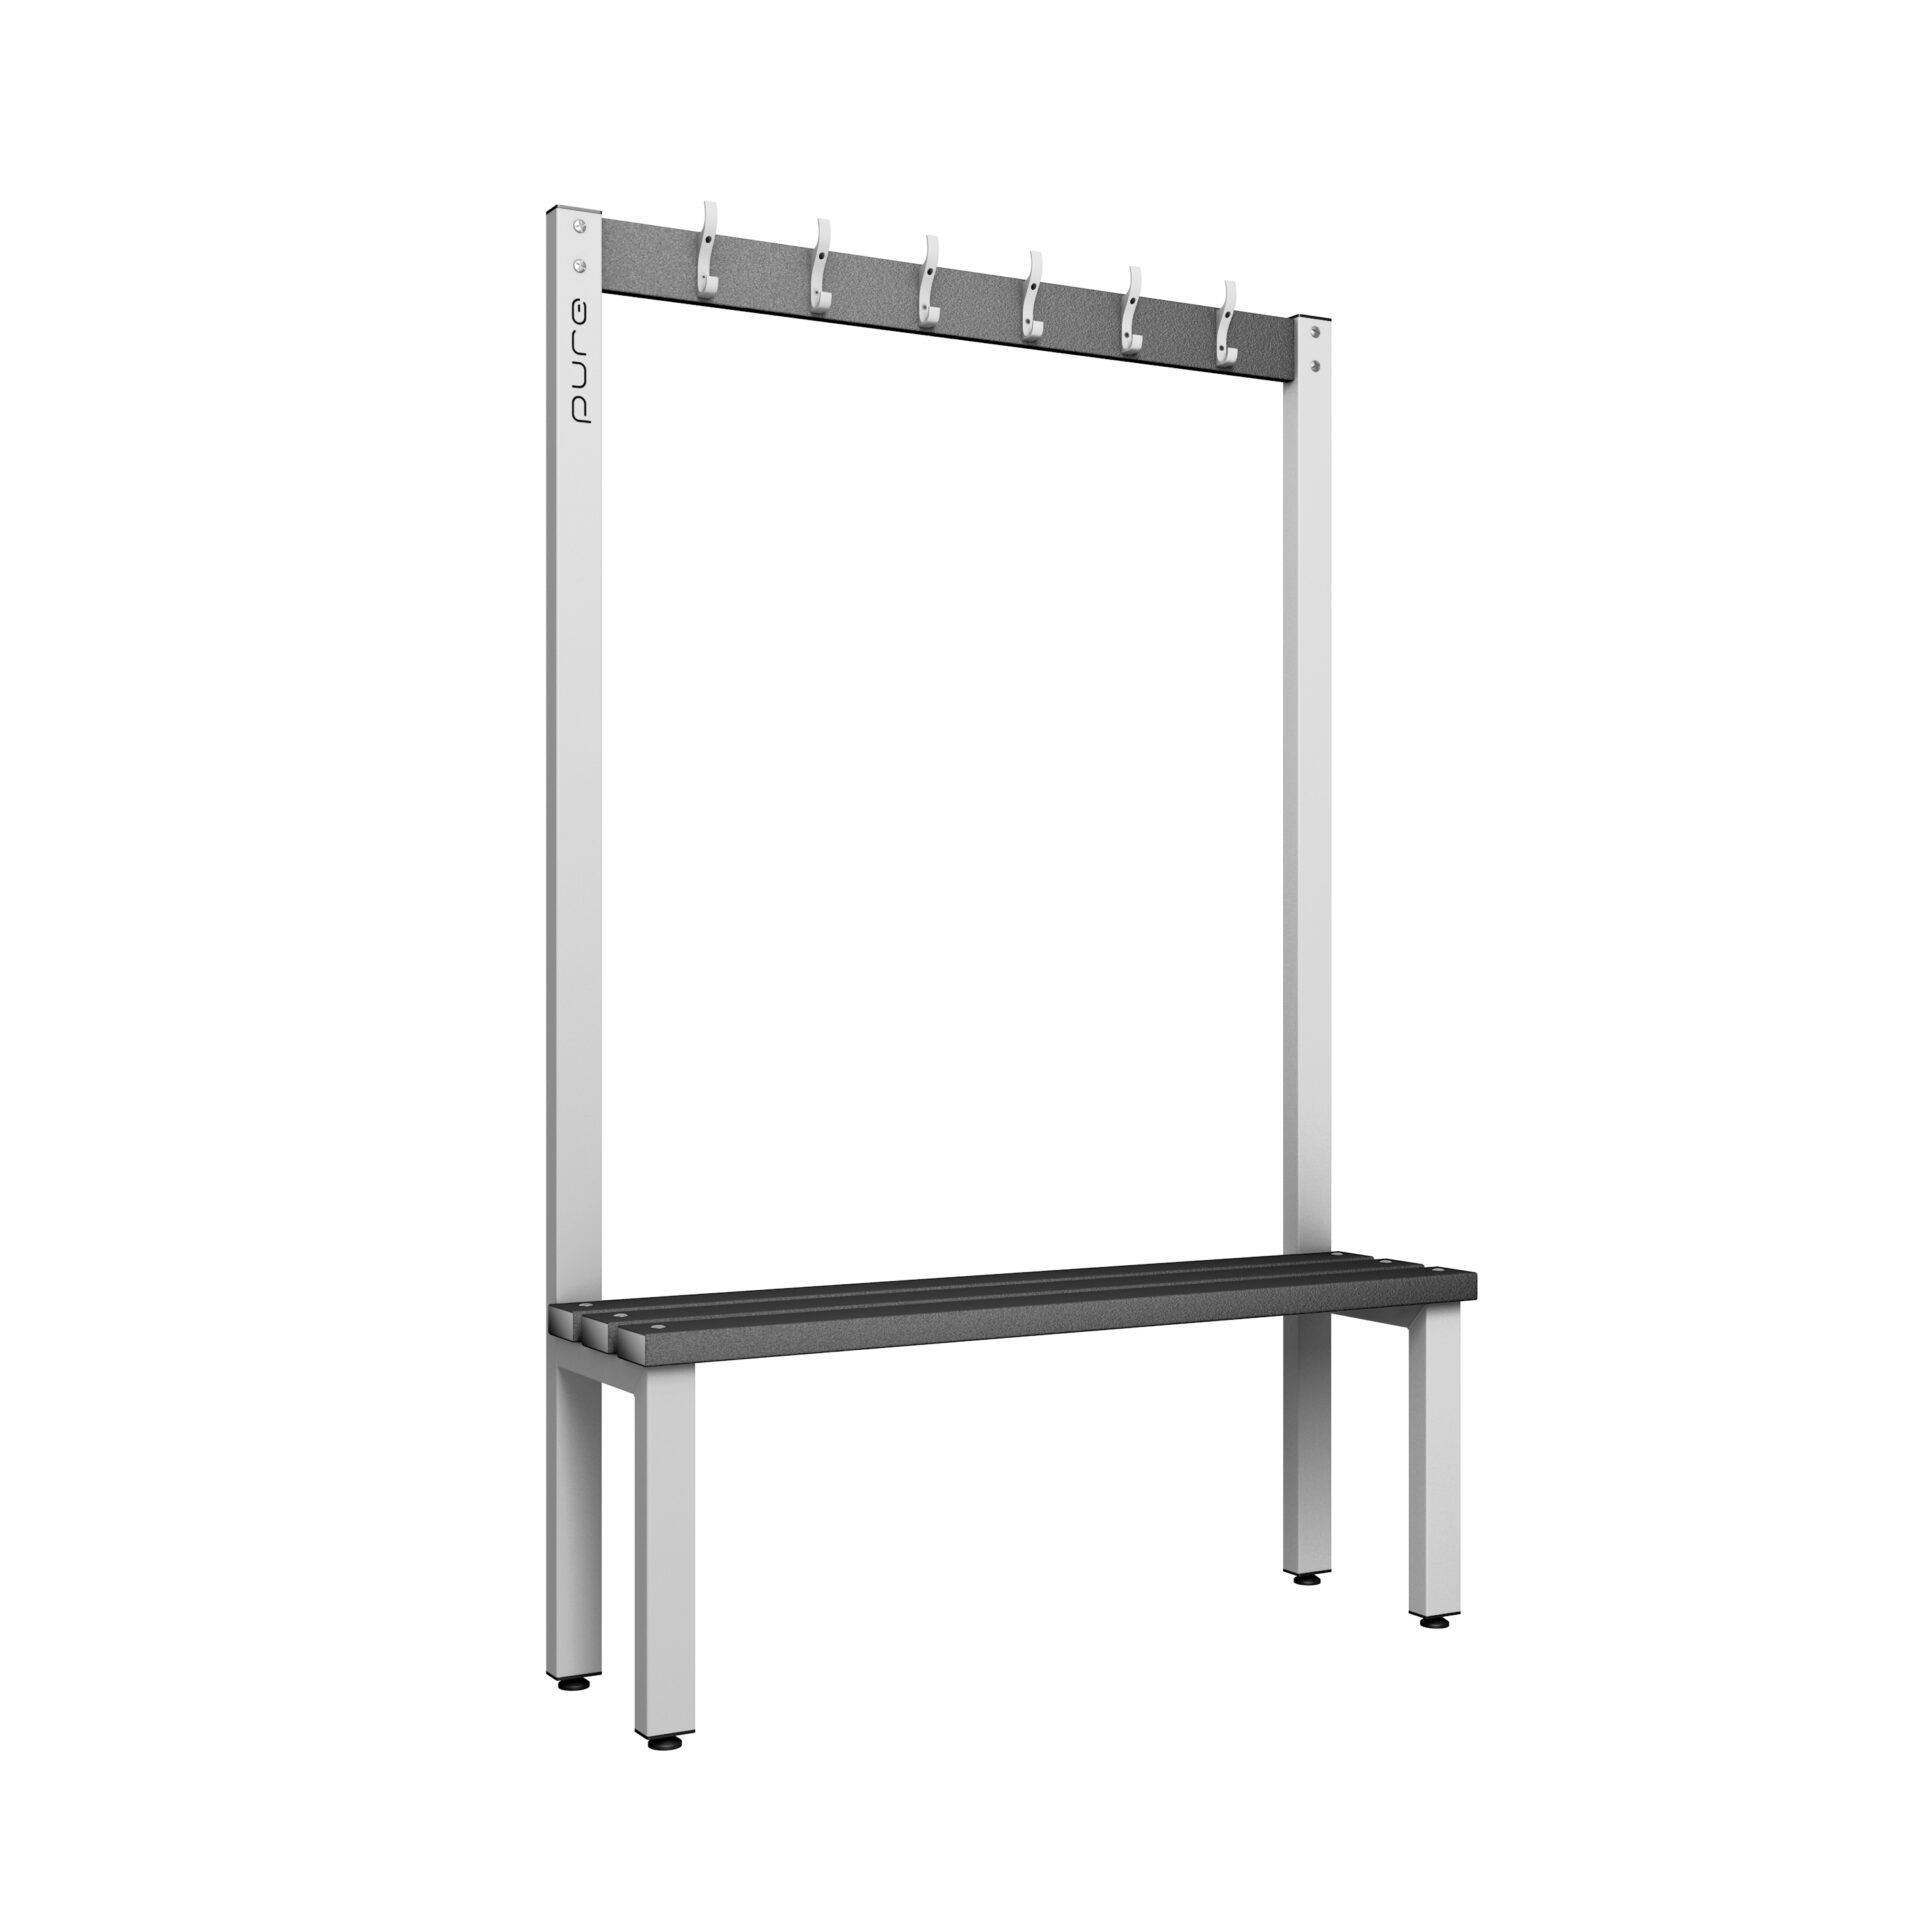 Pure Carbon Zero Single Sided 1200mm 6 Hook Bench - Pearl Silver / Black Polymer